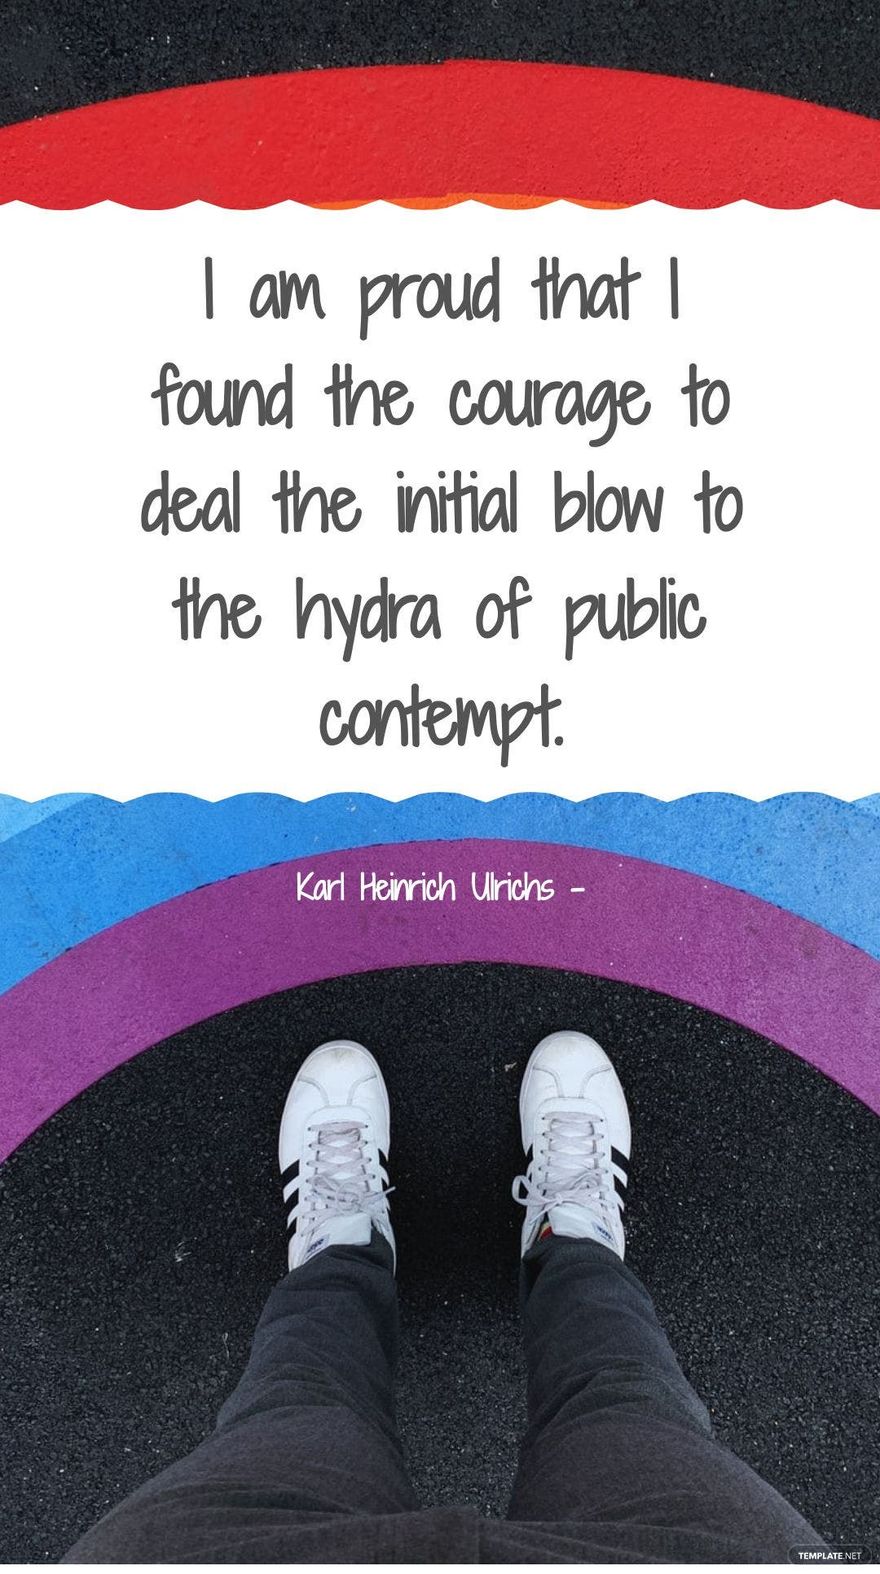 Karl Heinrich Ulrichs - I am proud that I found the courage to deal the initial blow to the hydra of public contempt.